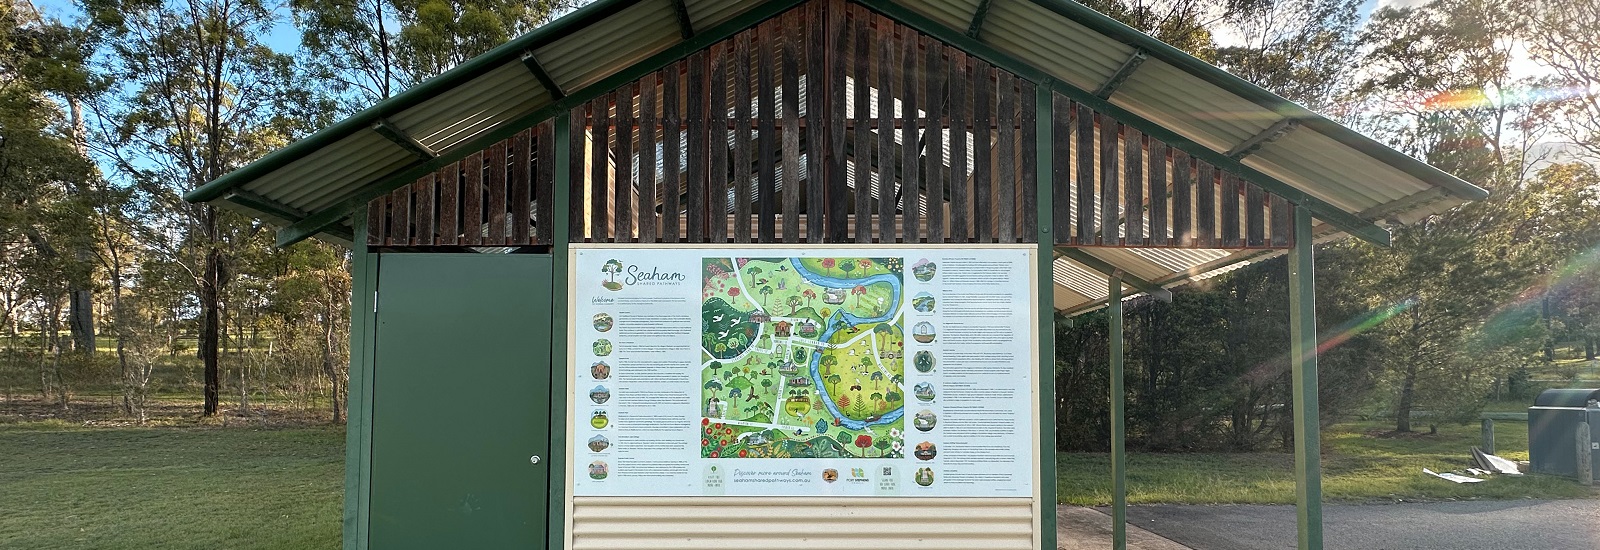 A sign with information and a map of Seaham